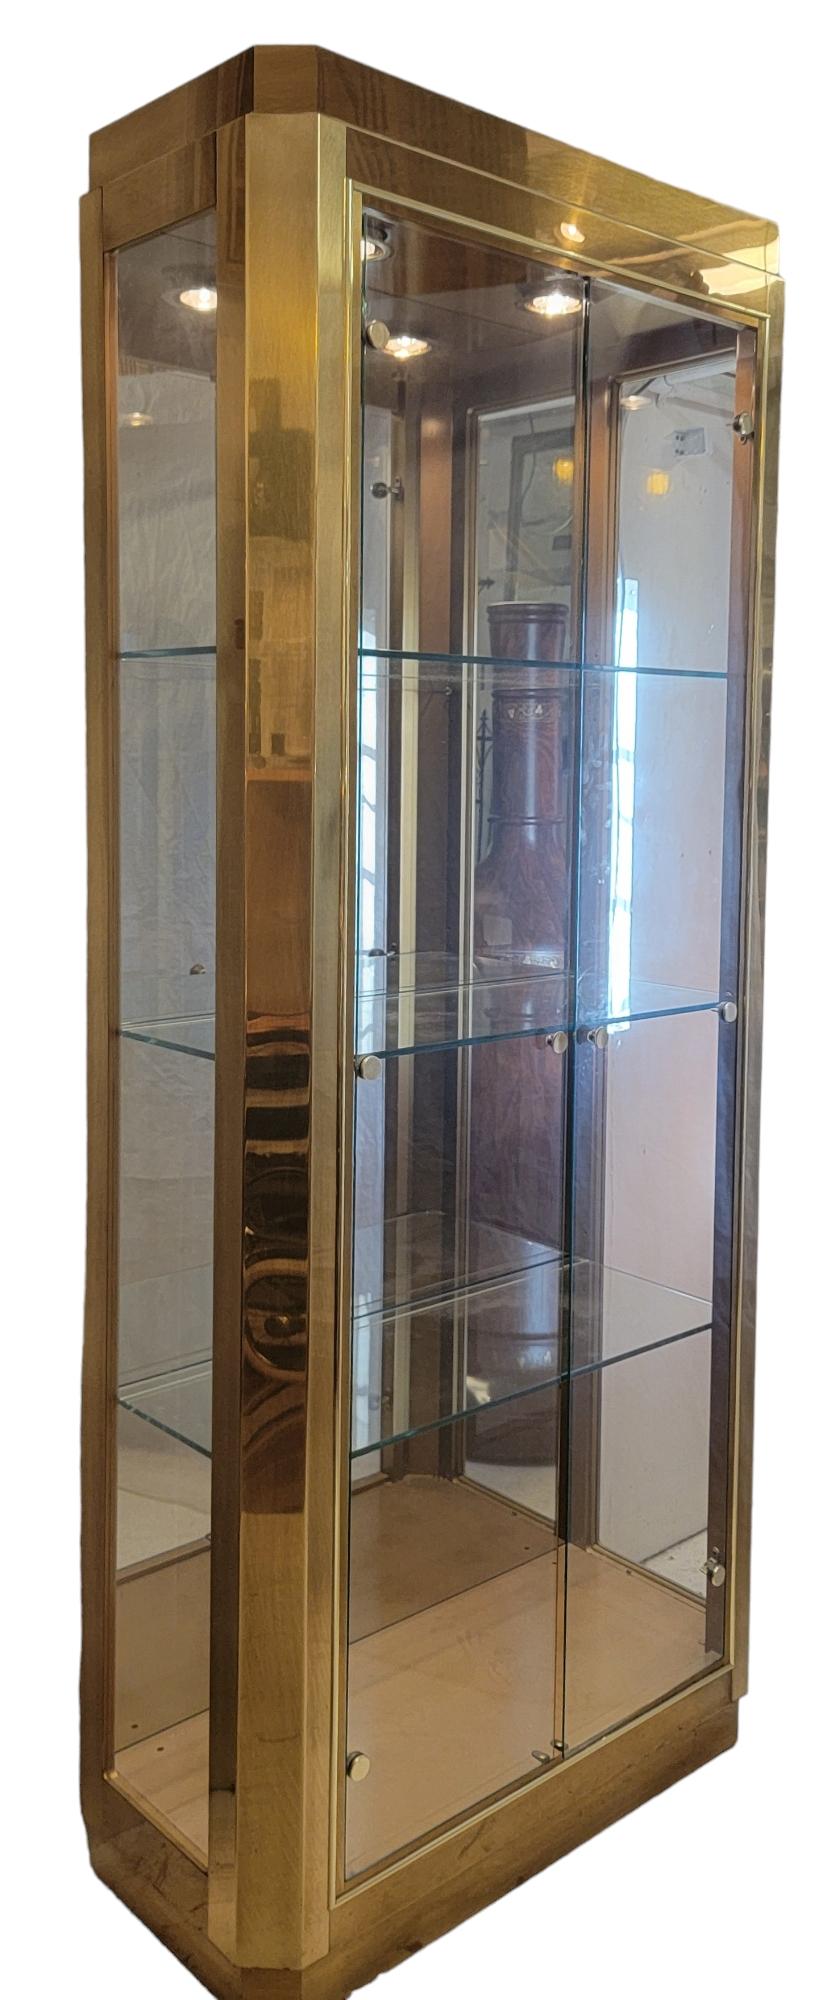 Three shelf brass and glass baker and company display case. beautiful edges on all corners. The brass  does show some signs of use with minor scratching to the surface. The glass is all intact an in great condition. The doors open and close with